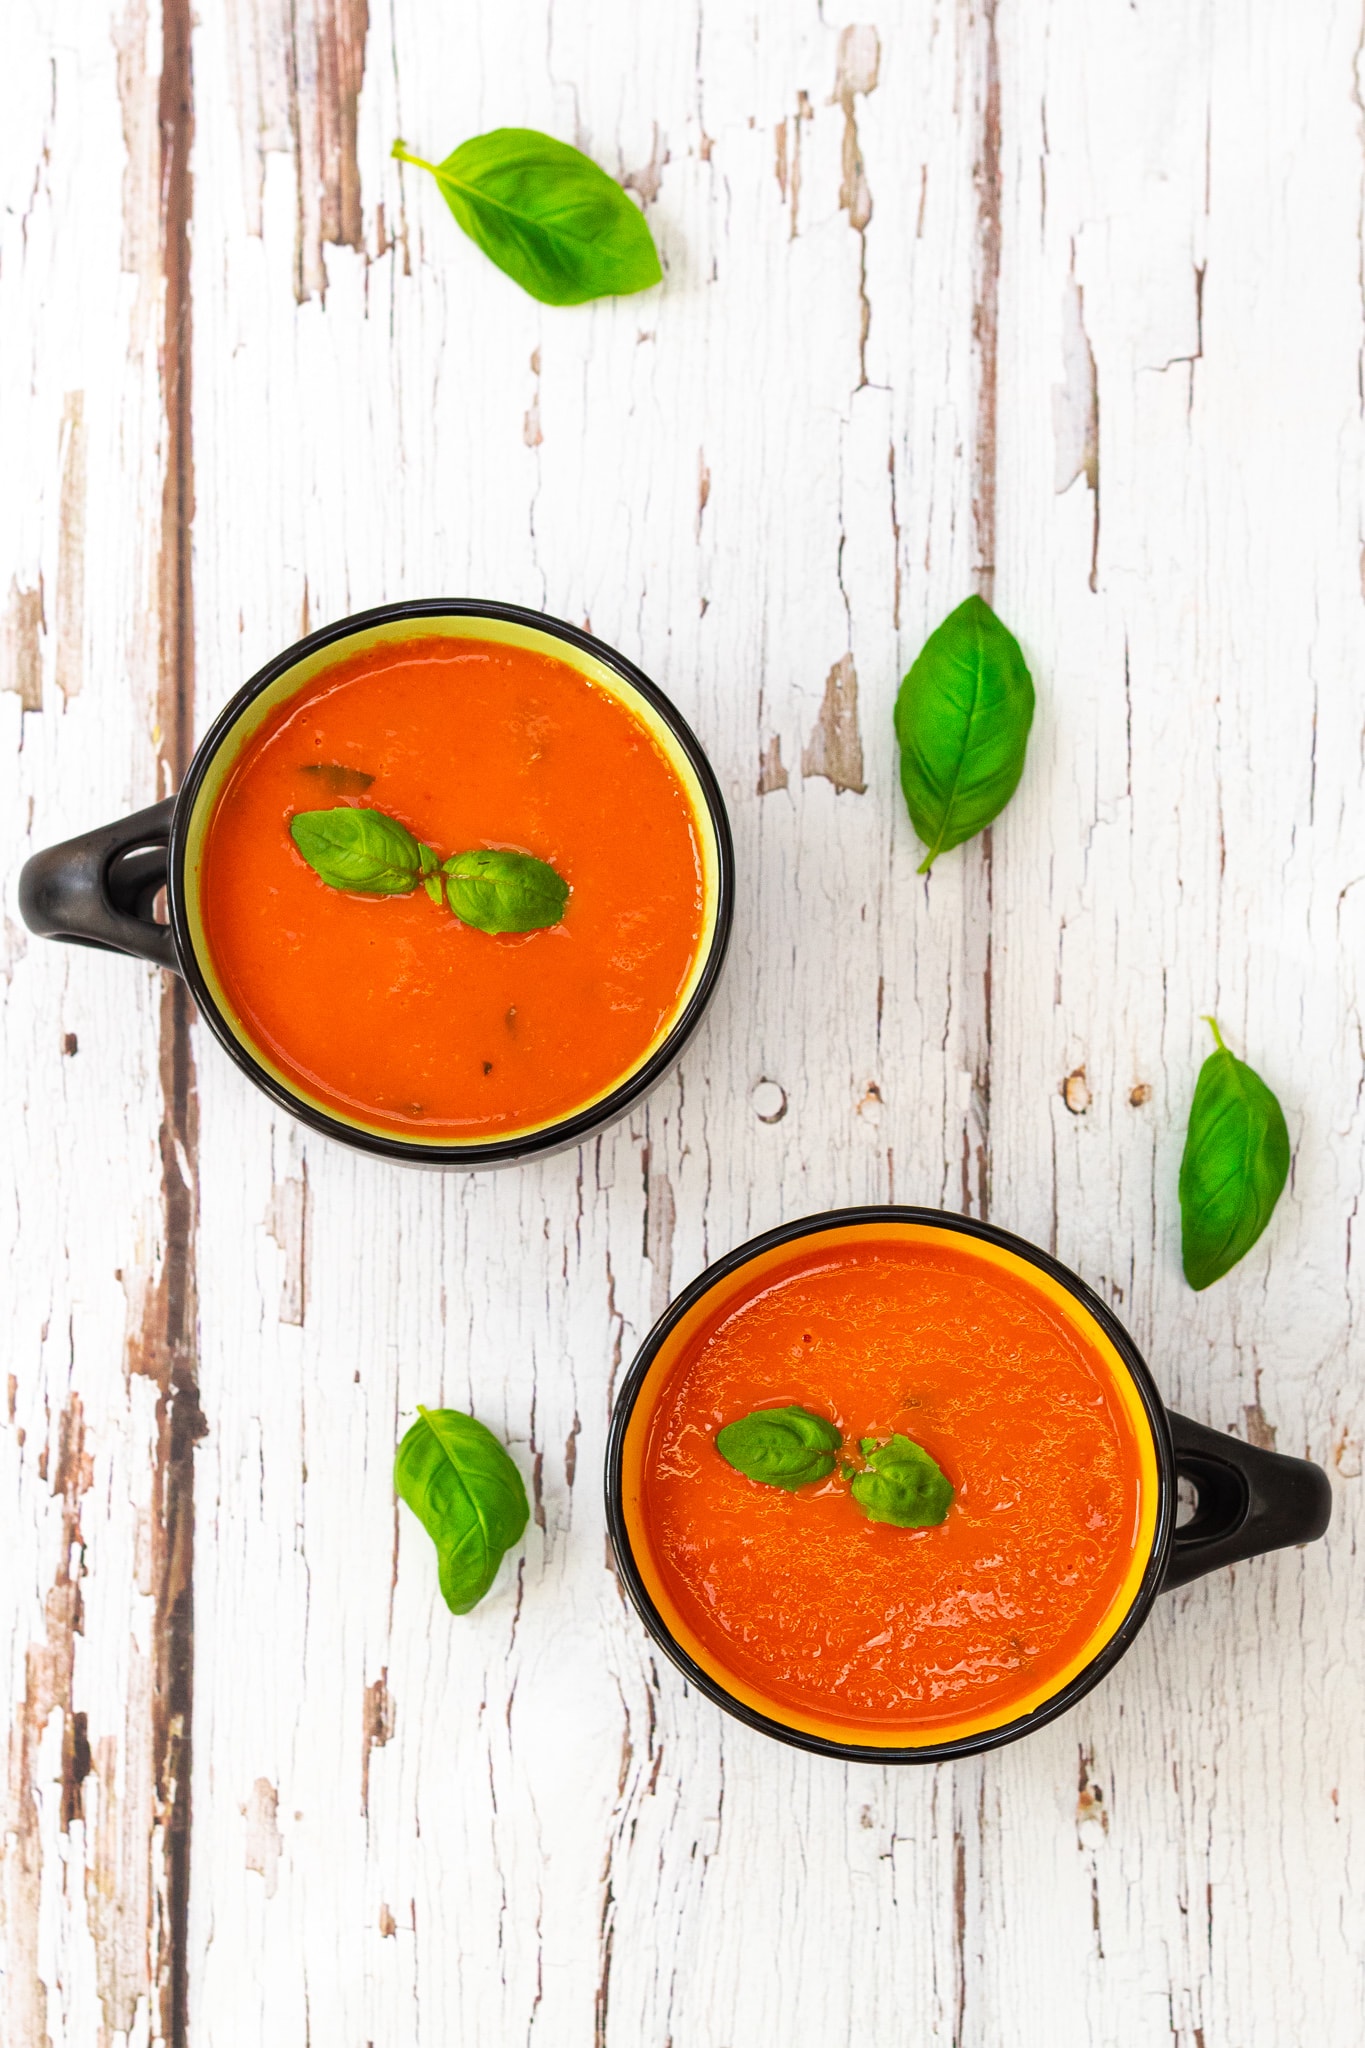 two bowls of tomato soup with basil leaves